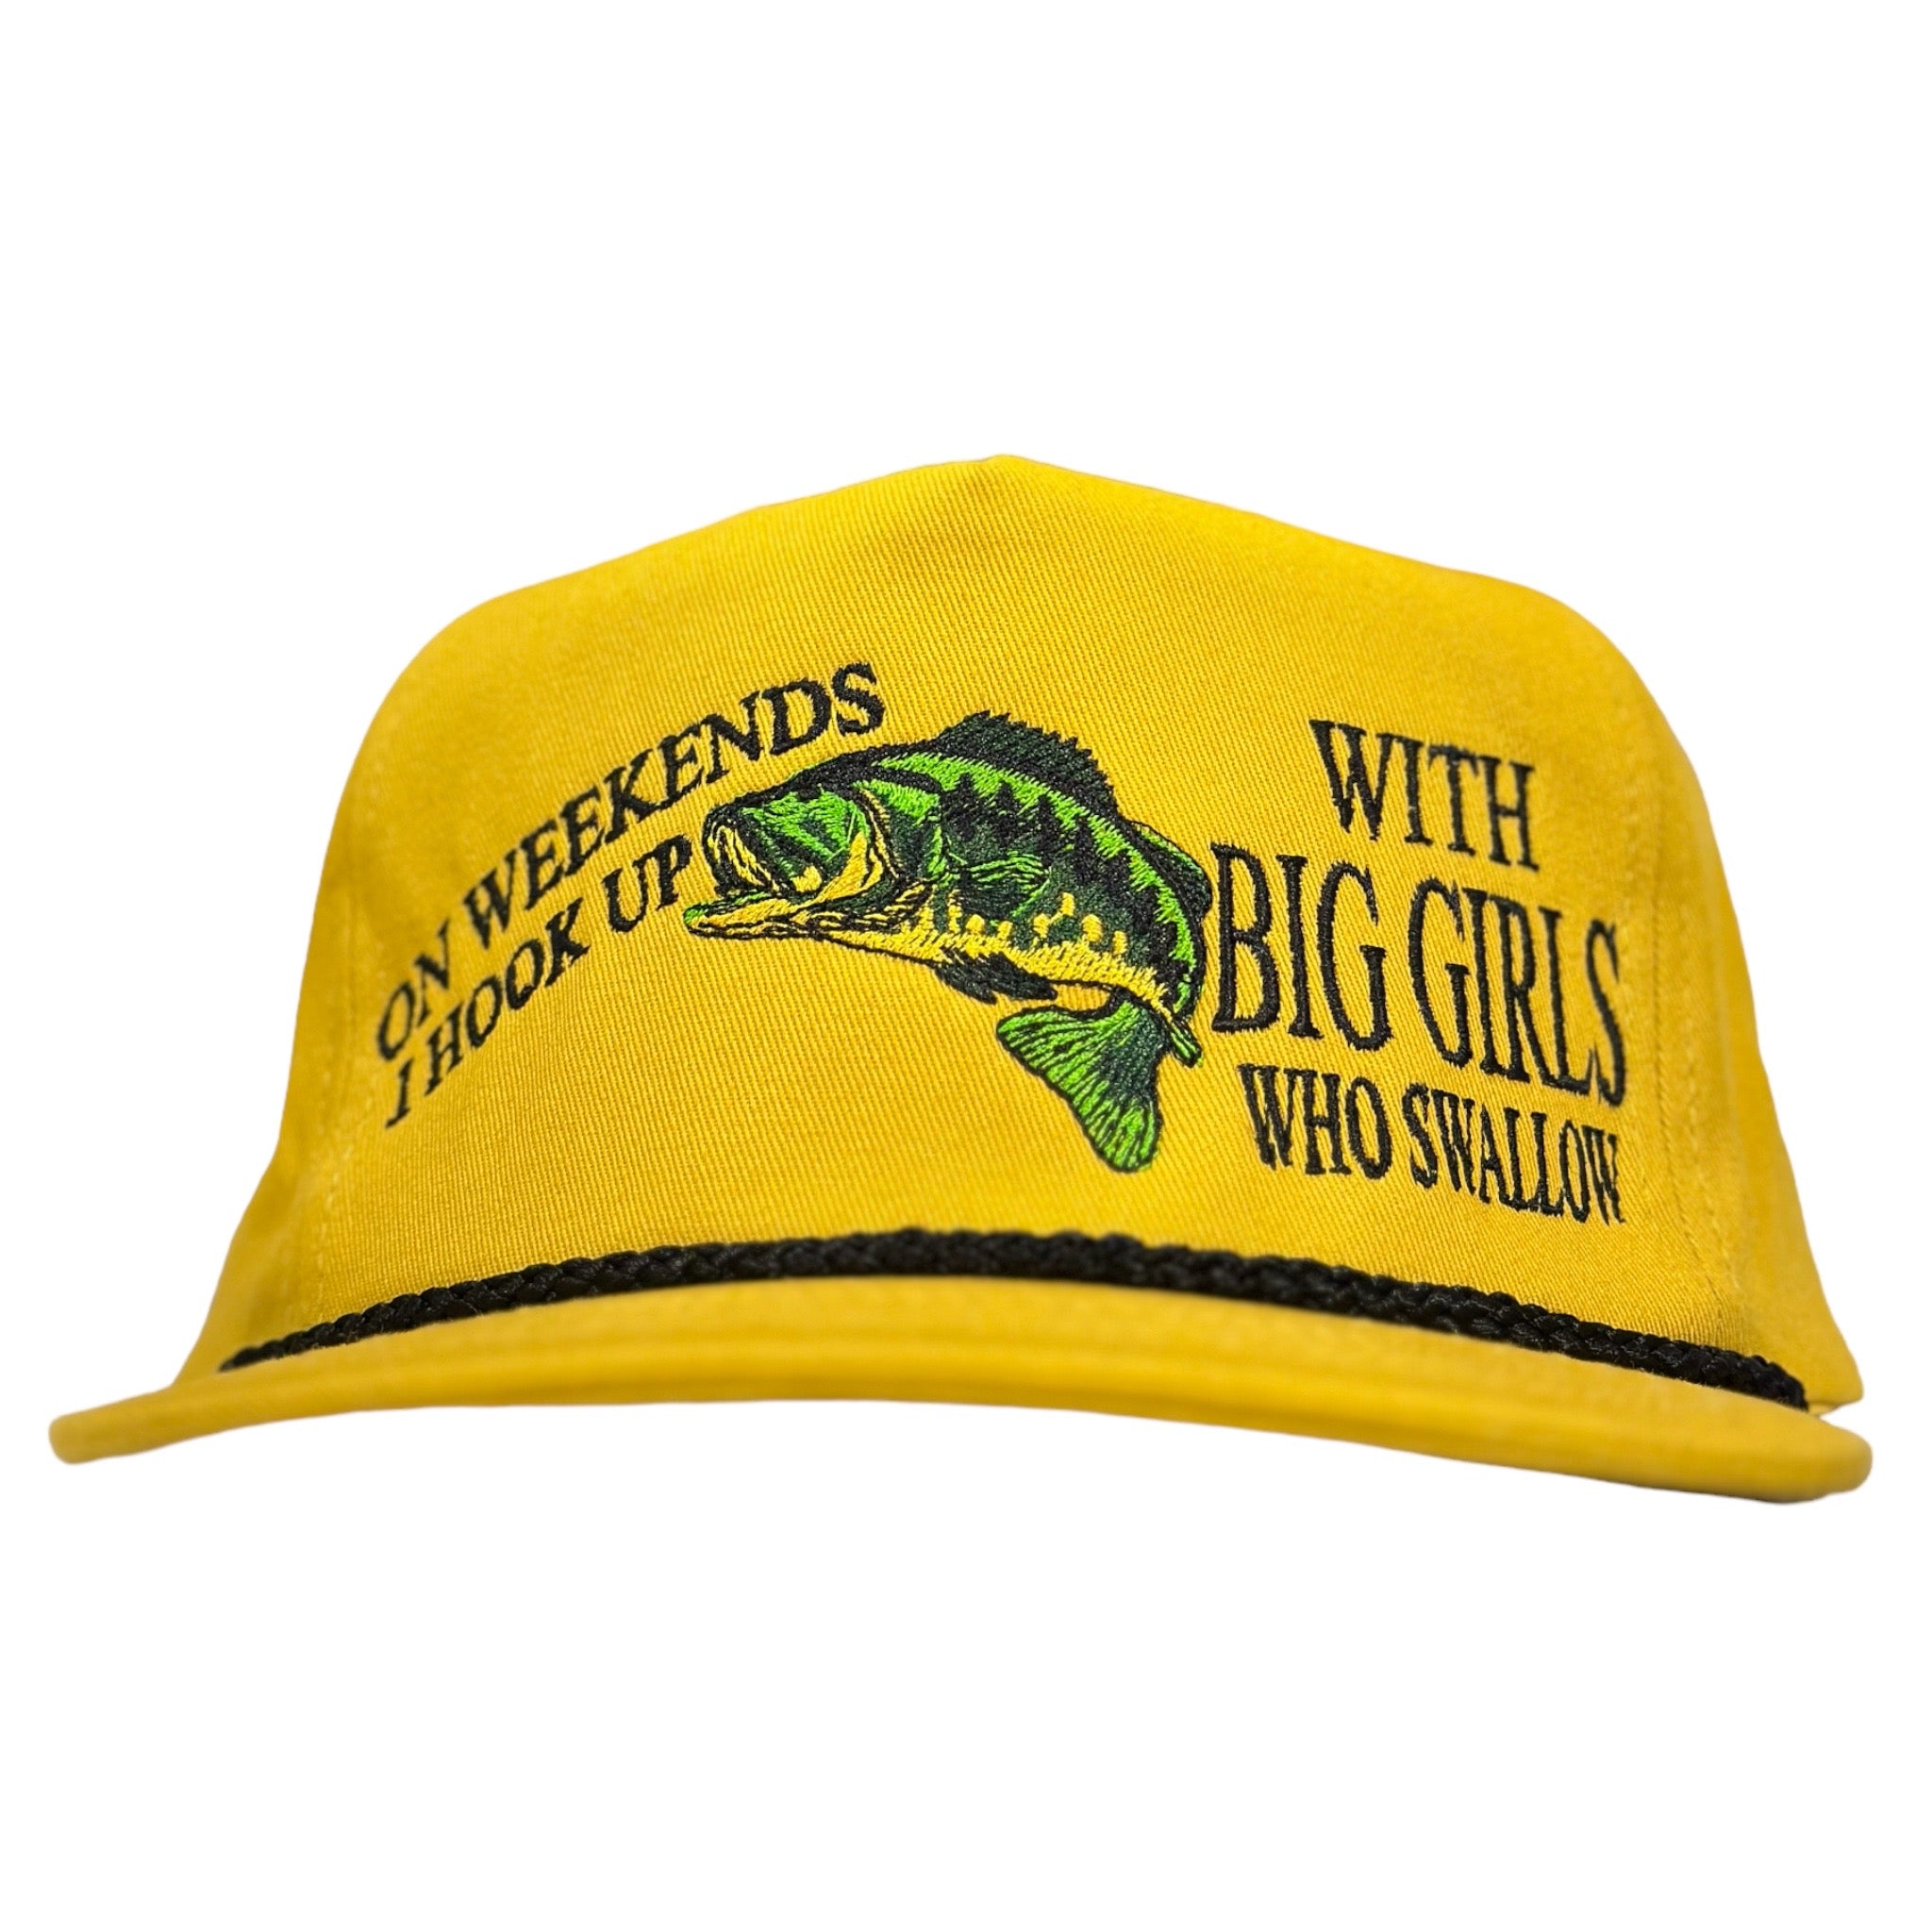 ON WEEKENDS I HOOK UP WITH BIG GIRLS WHO SWALLOW Mustard Rope SnapBack –  Old School Hats